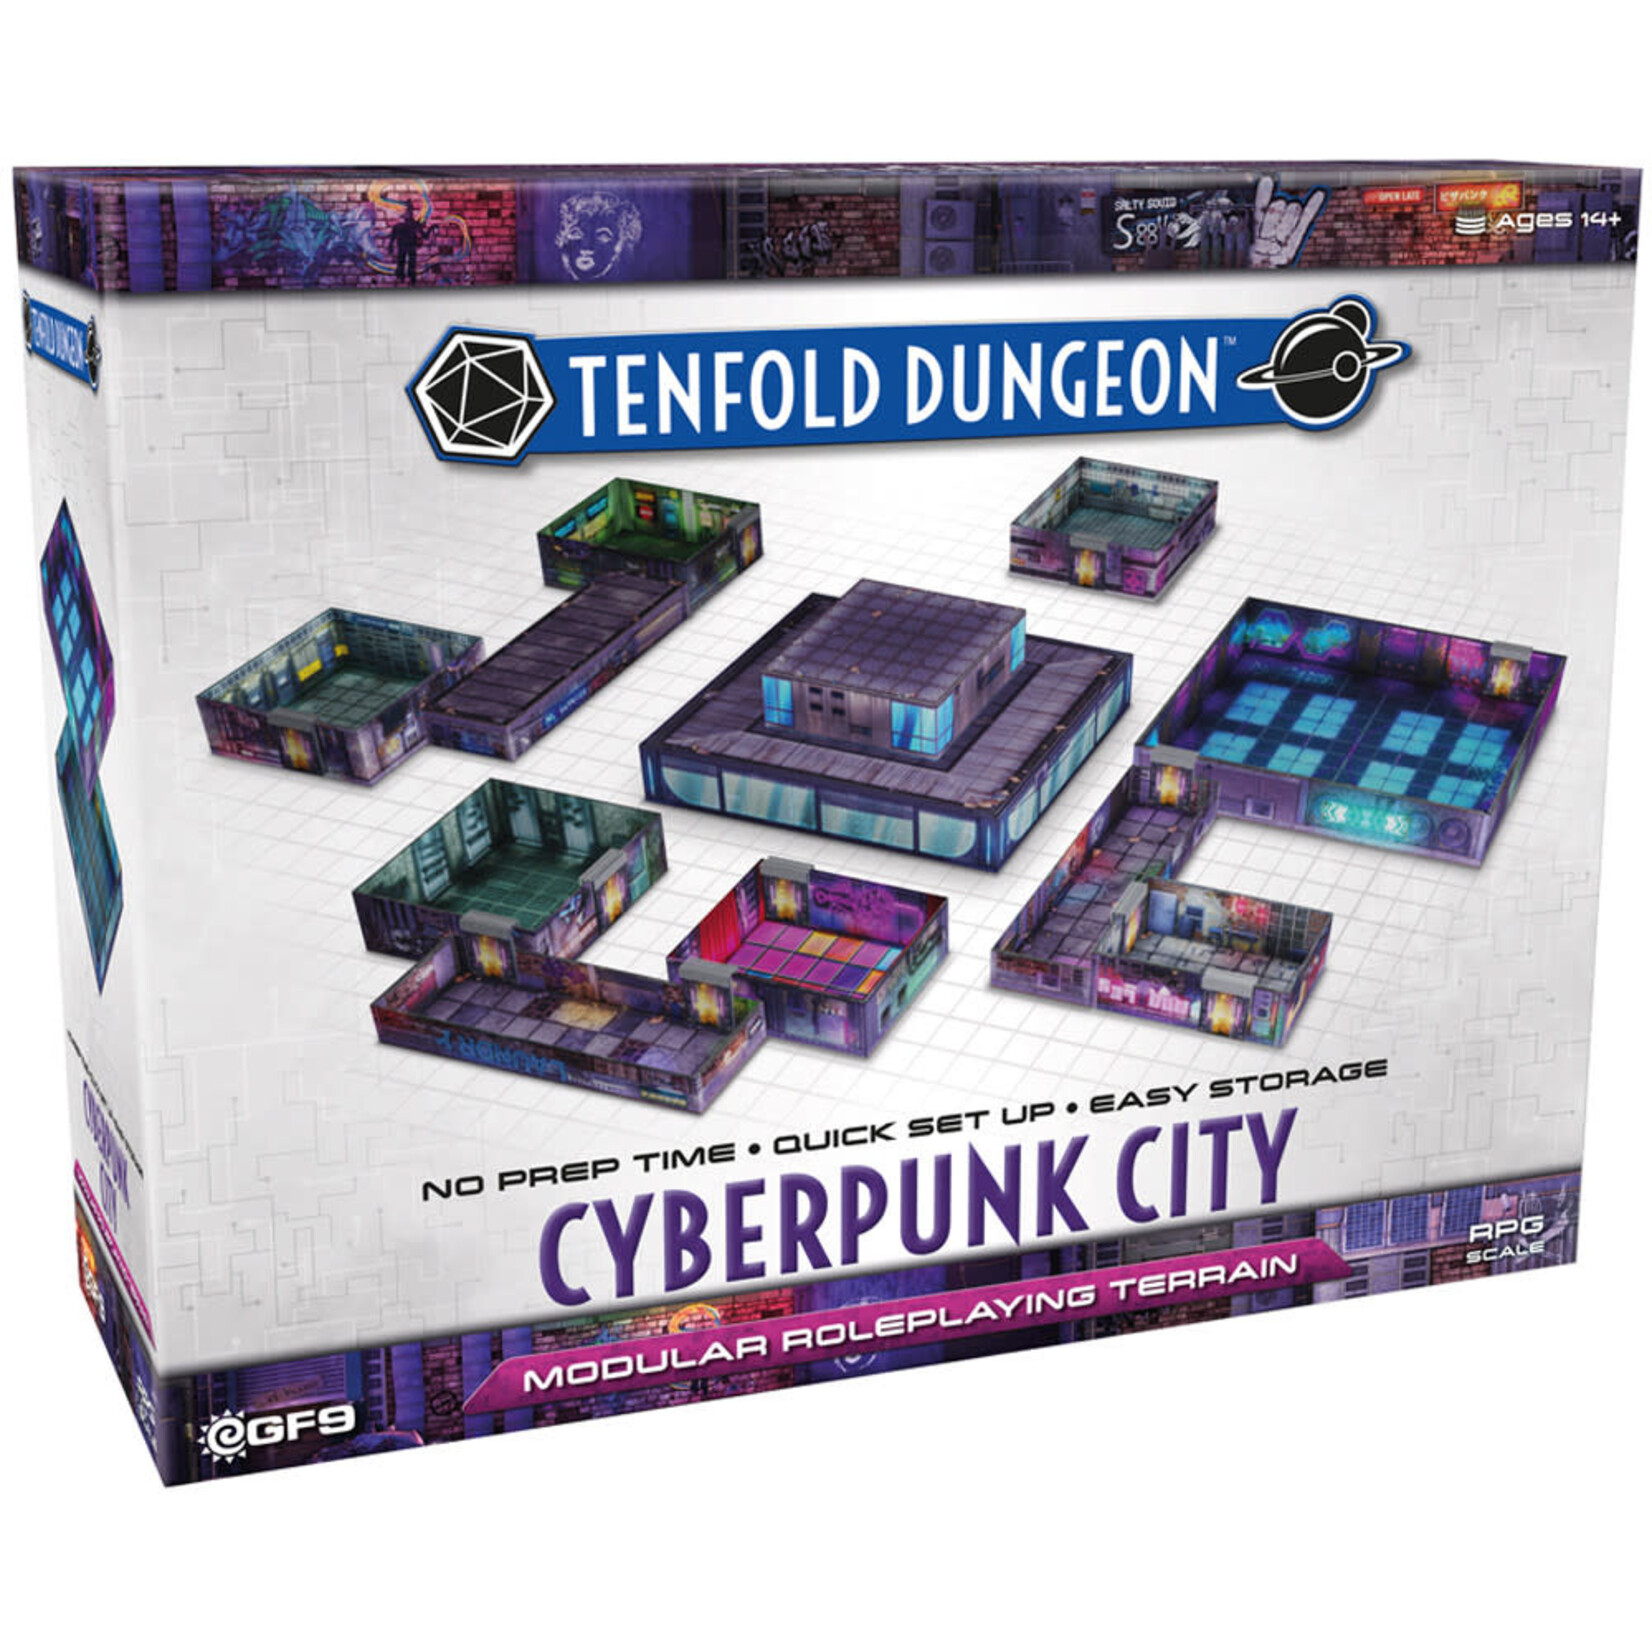 Gale Force 9 Tenfold Dungeon Cyberpunk City